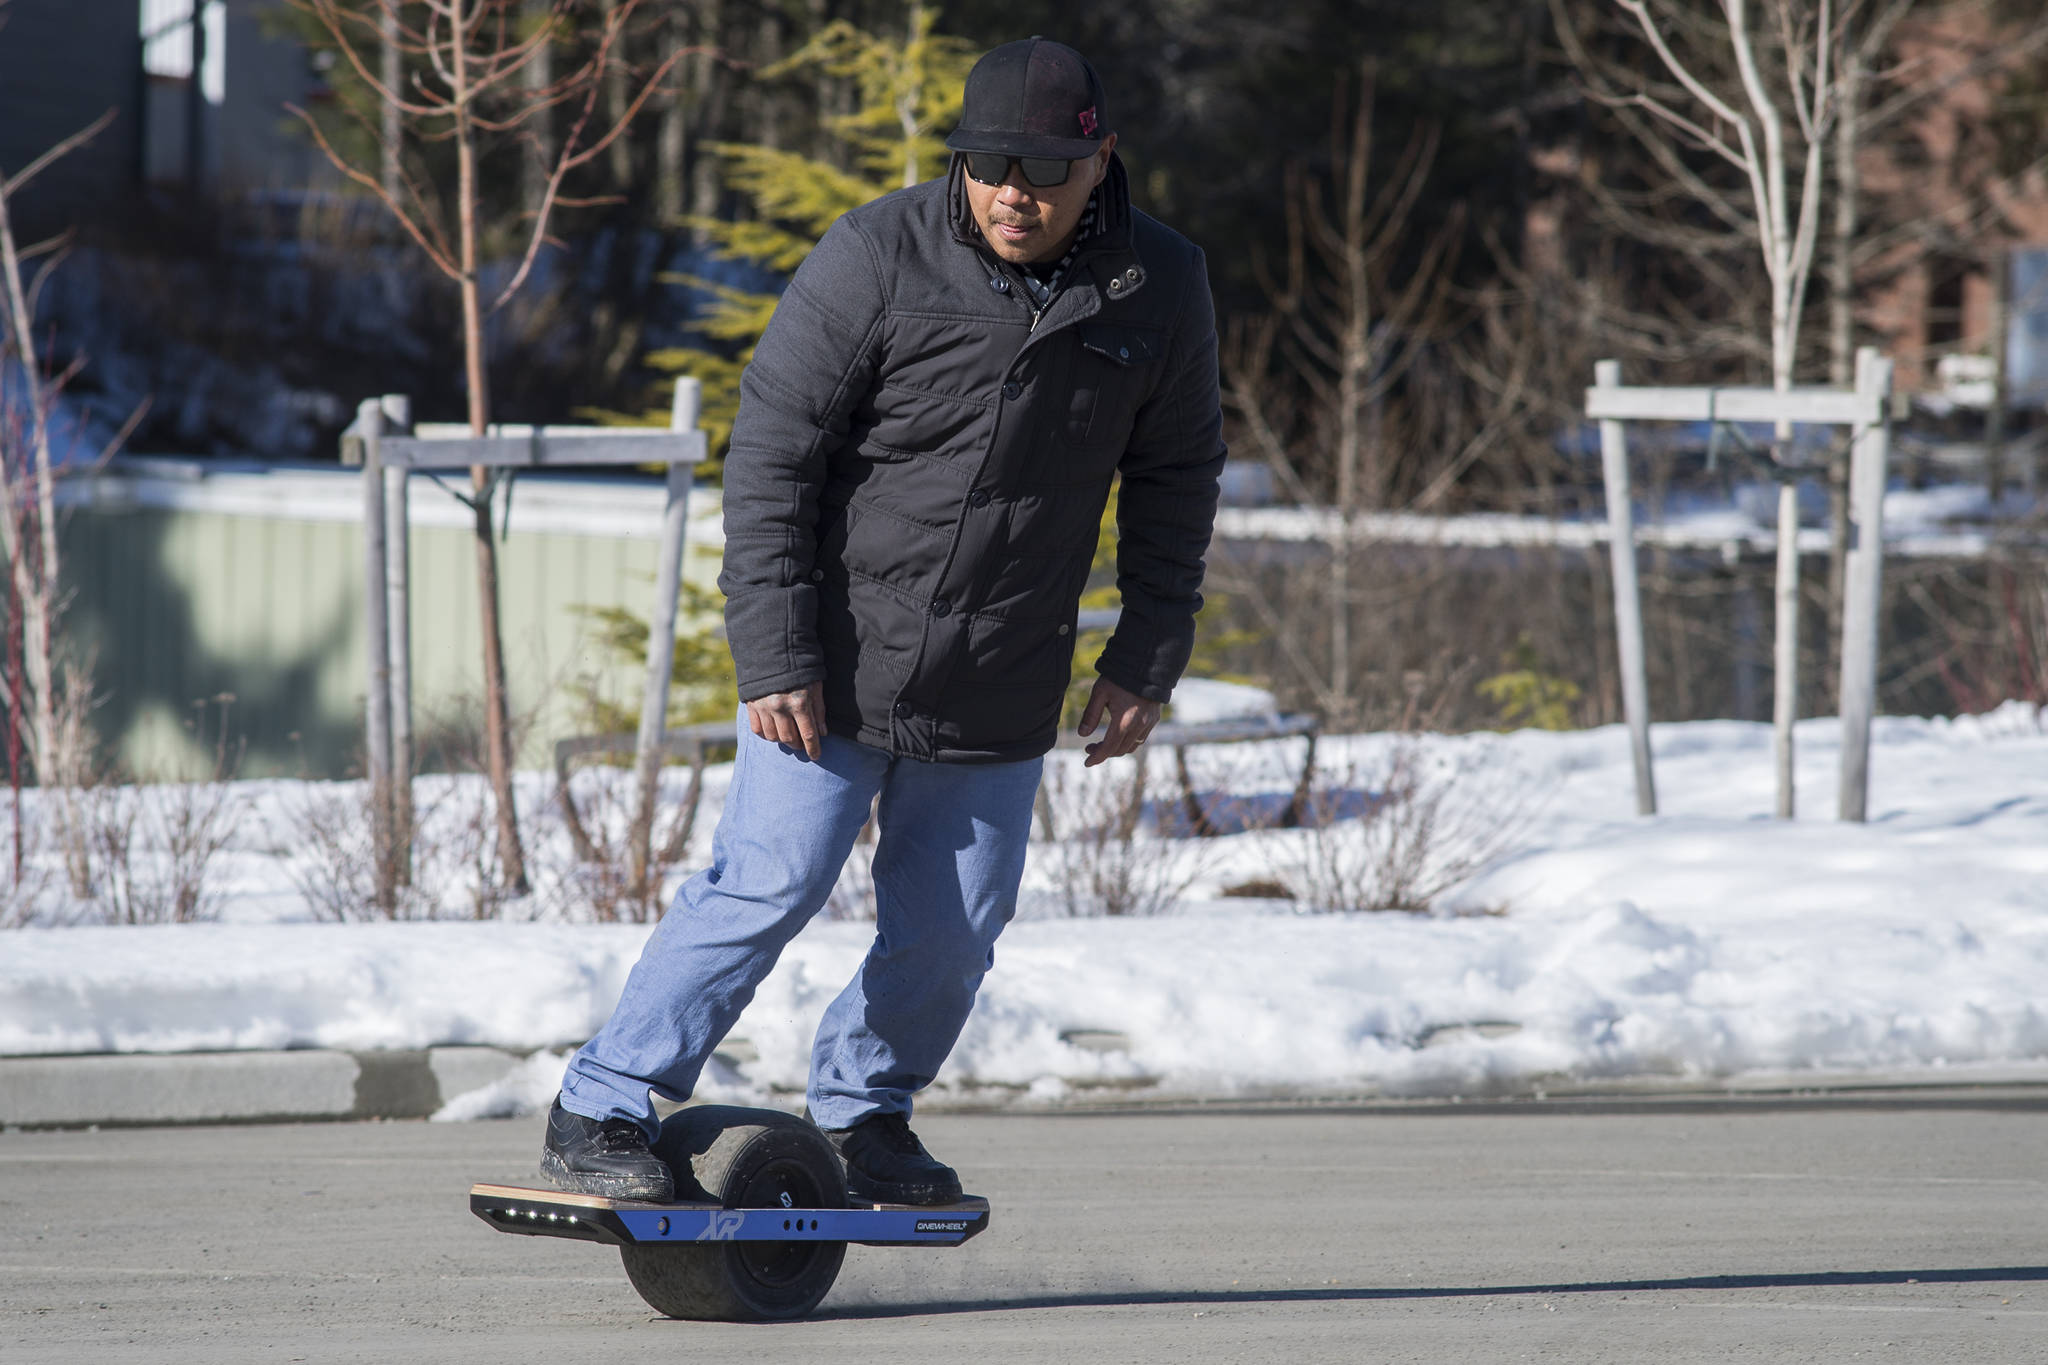 Emery Banua practices riding his Onewheel+ XR electric board in the Auke Bay Harbor parking lot on Tuesday, March 5, 2019. Banua said he just received the device that rides like a skateboard but can also go uphill and has a 12 to 18 mile range. (Michael Penn | Juneau Empire)